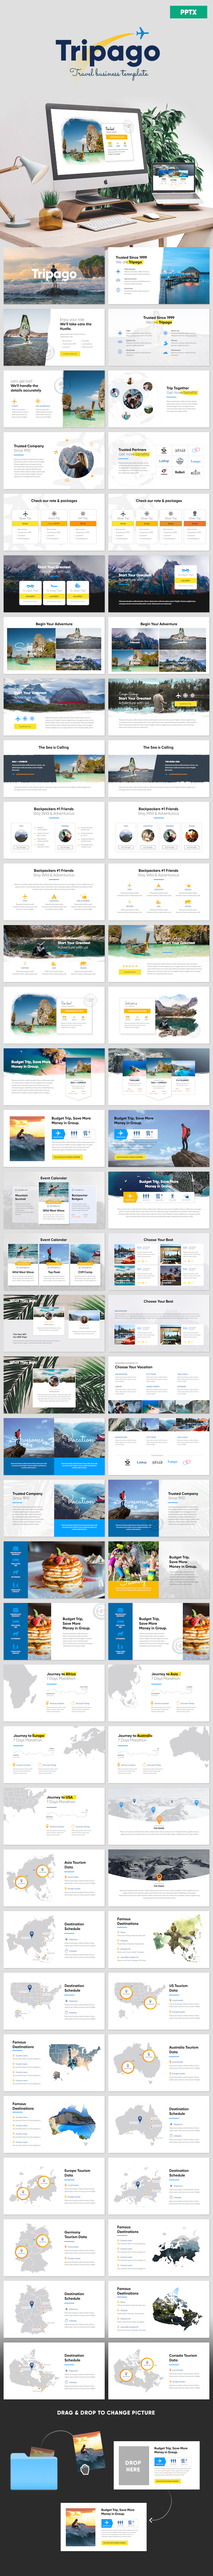 Tripago - Travelling Business Powerpoint Template